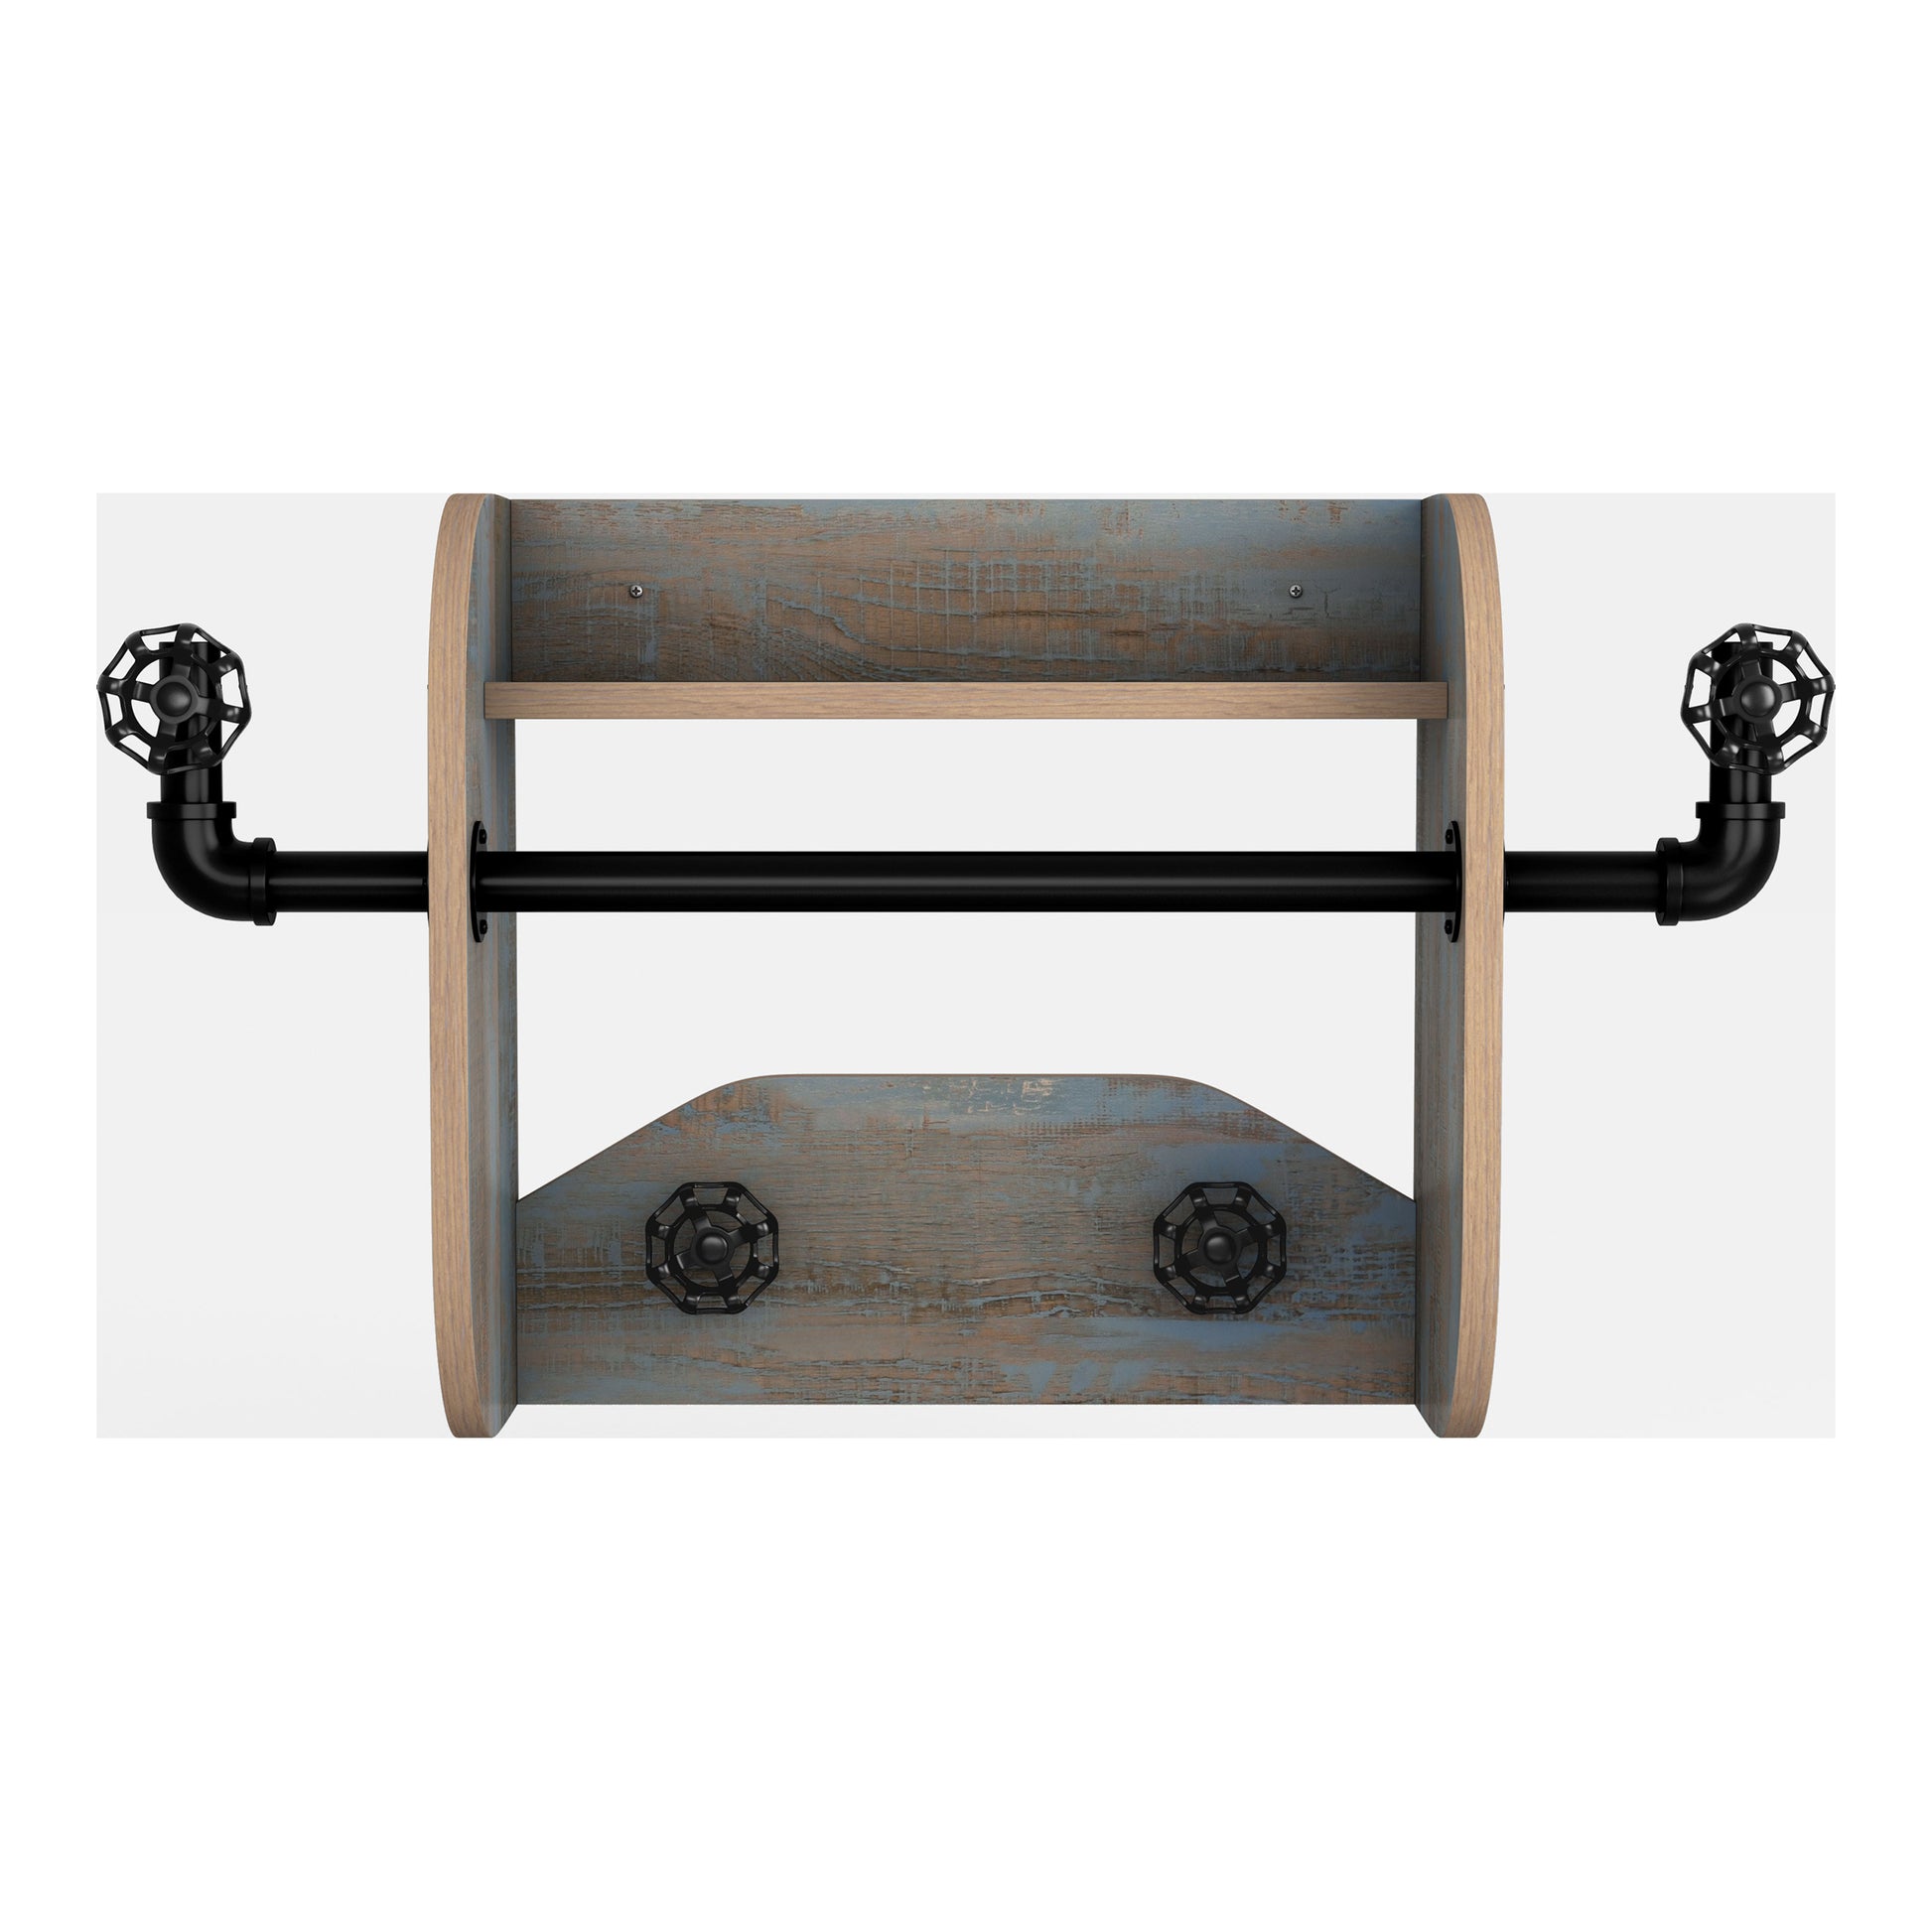 Front-facing industrial distressed blue wood and water valve wall mounted rack with one shelf on a neutral background